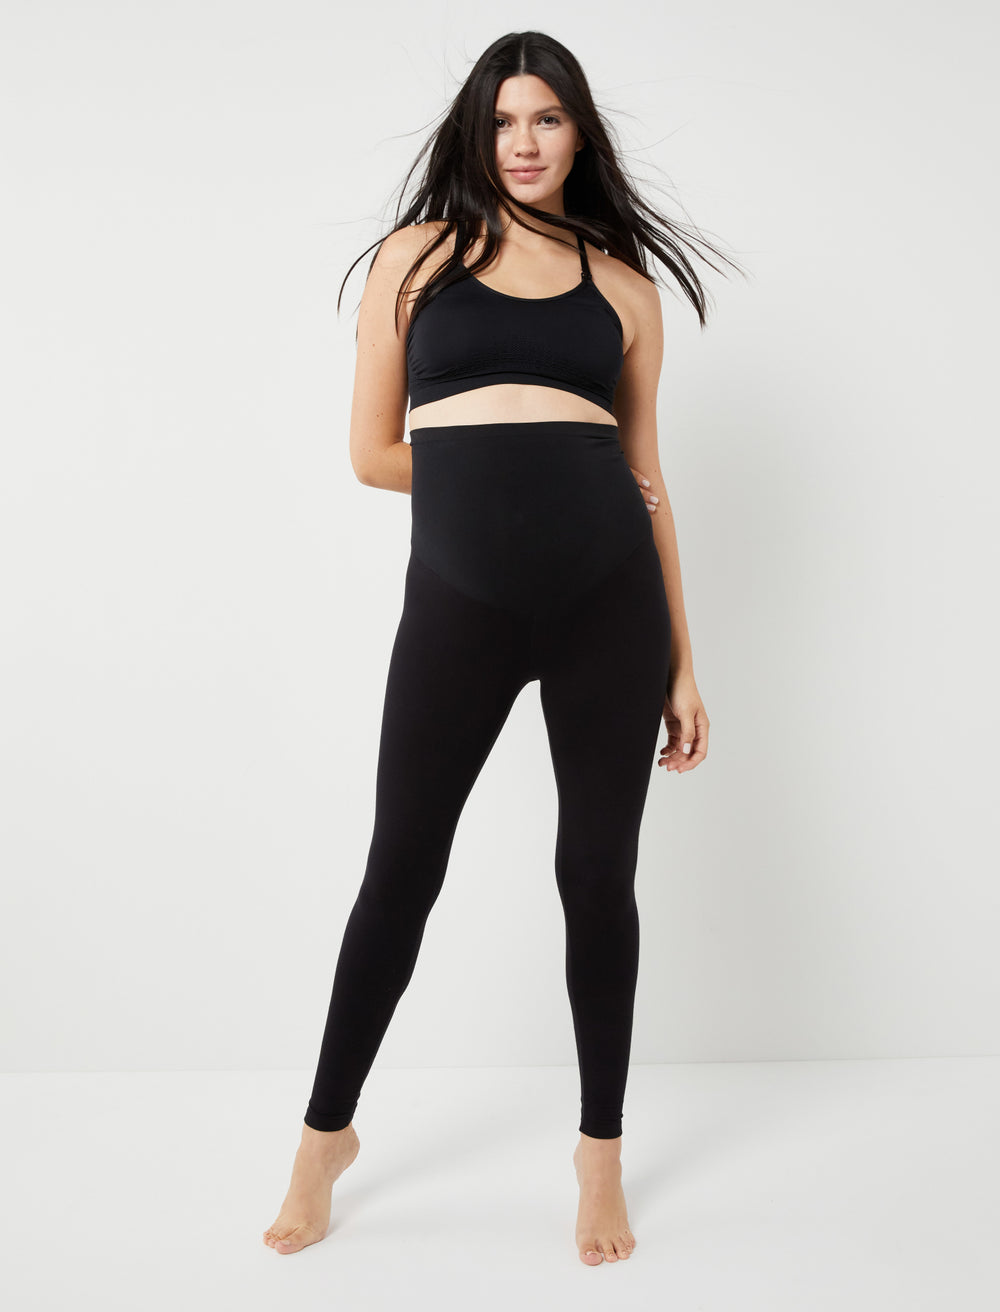 Luxe Essentials Secret Fit Belly Ultra Soft Maternity Leggings